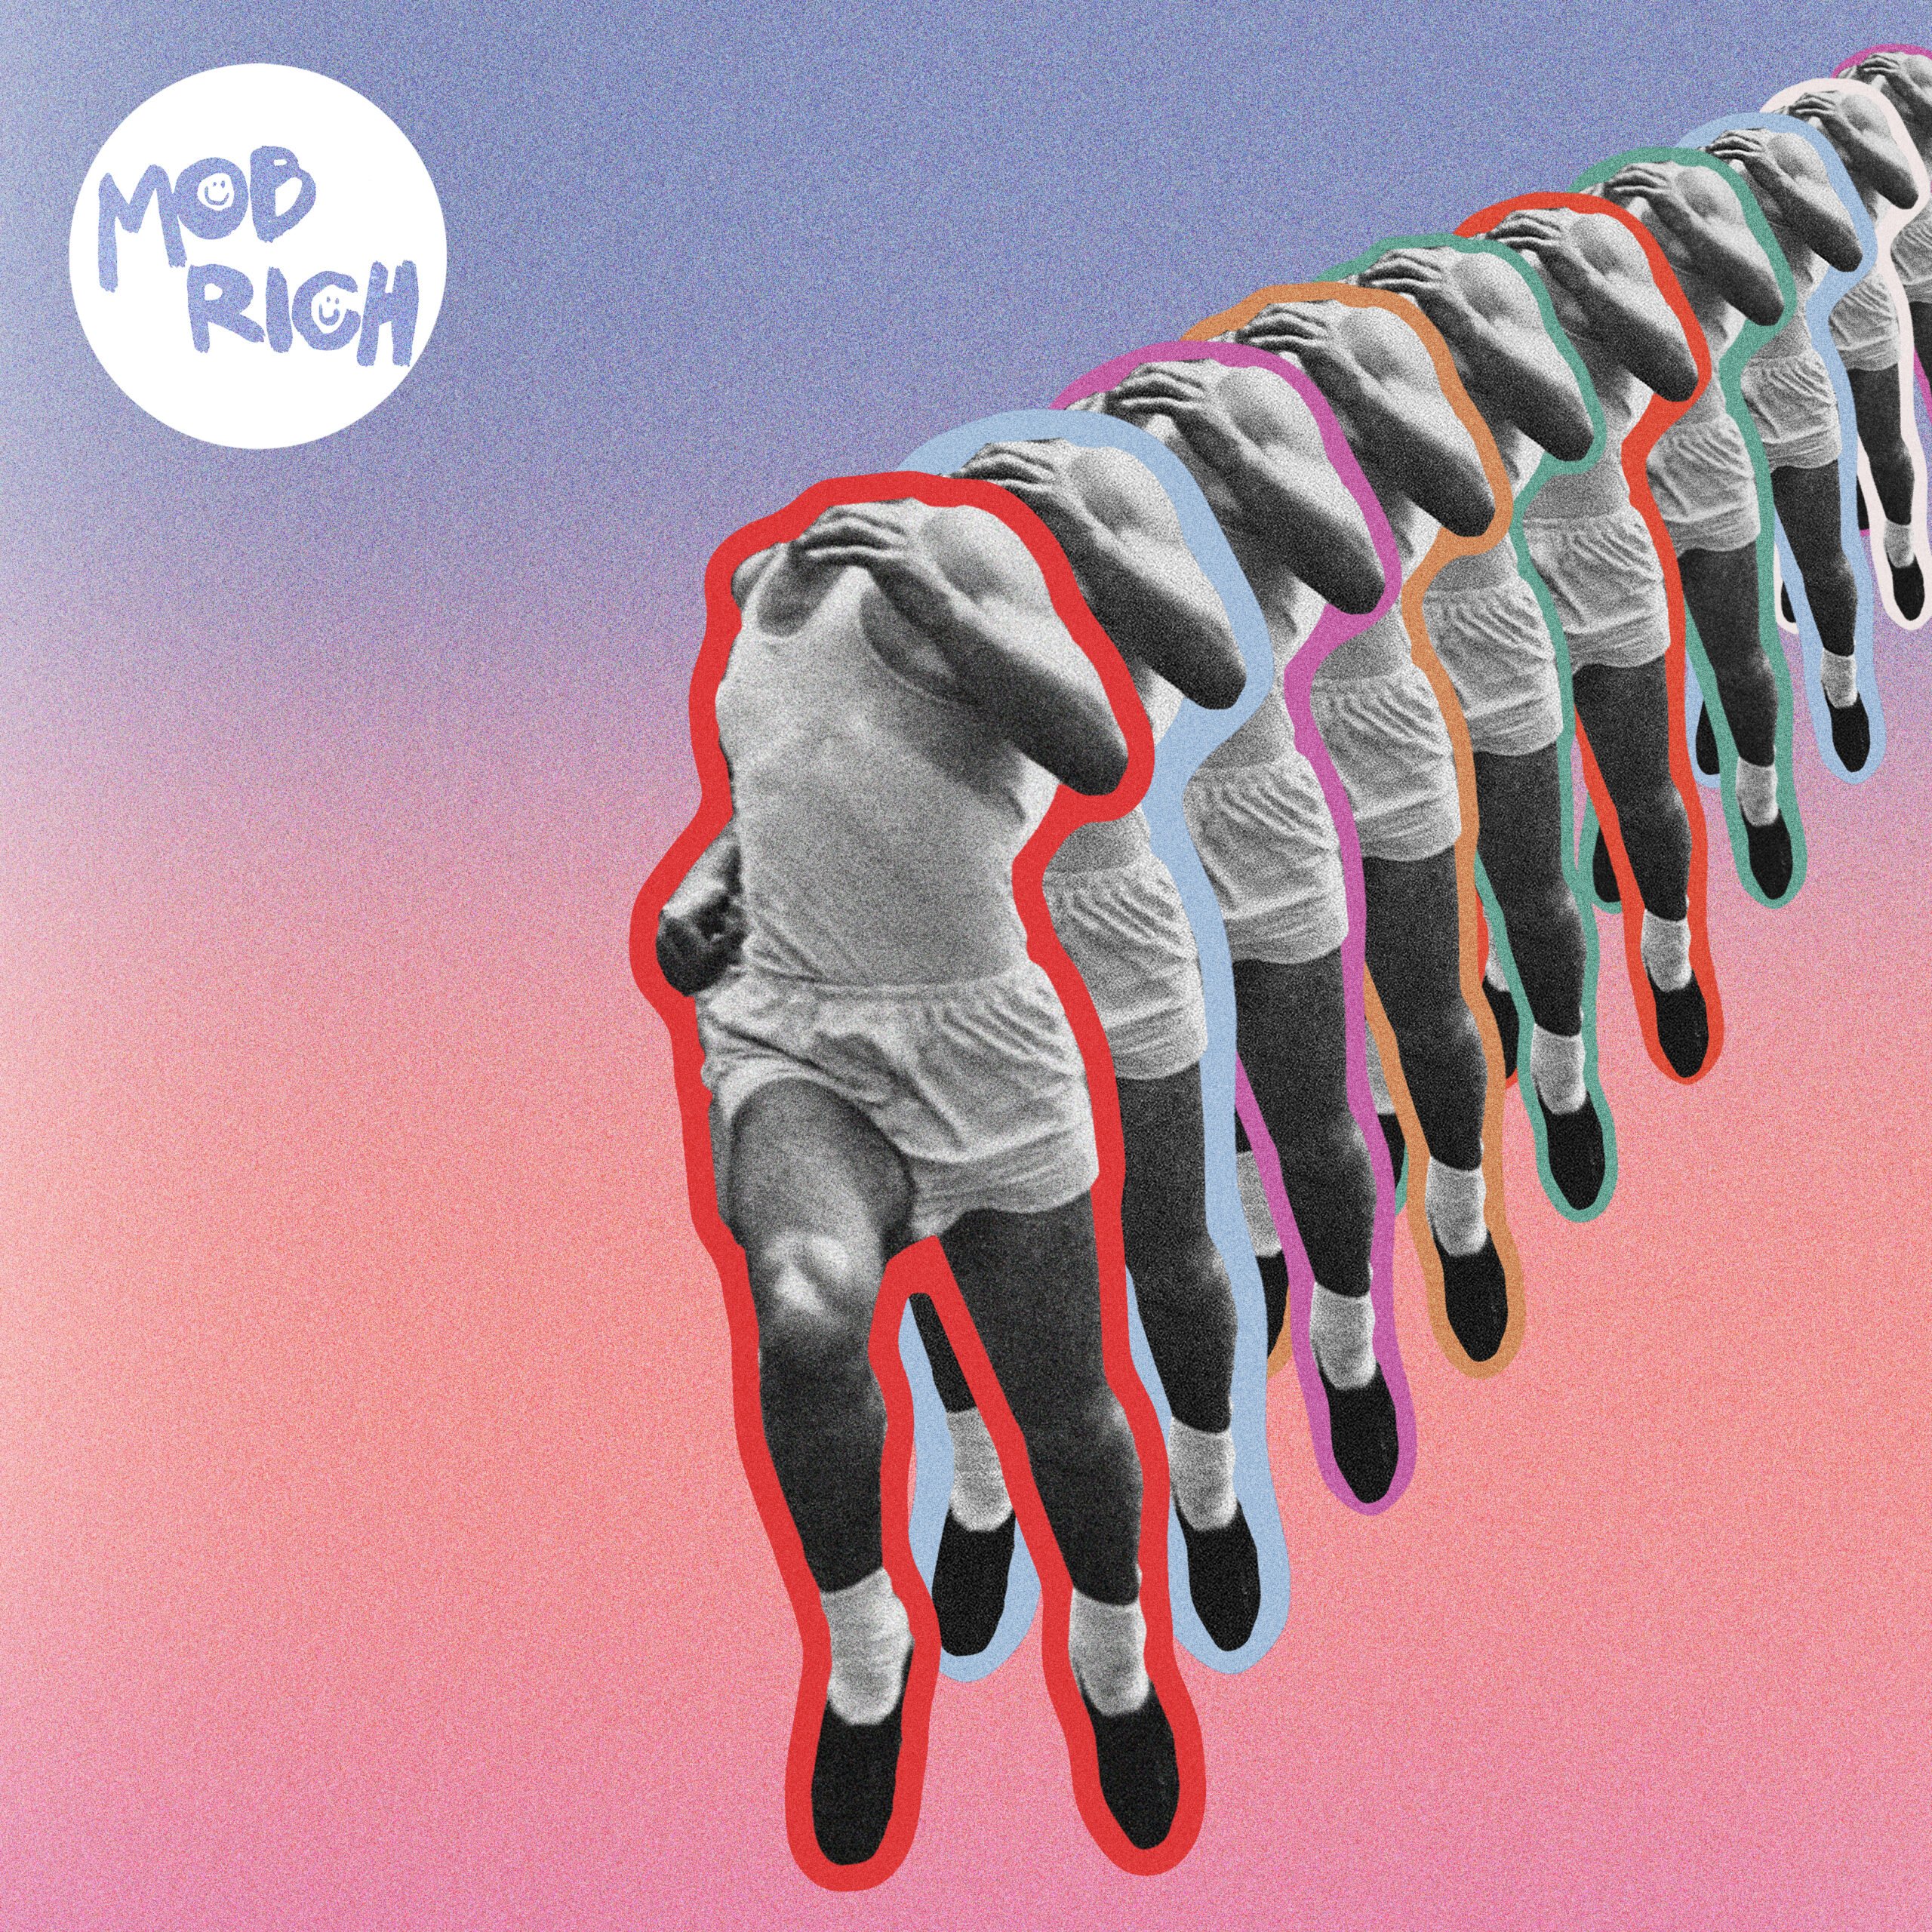 Hell Yeah Mob Rich Artwork courtesy of Republic Records for use by 360 Magazine